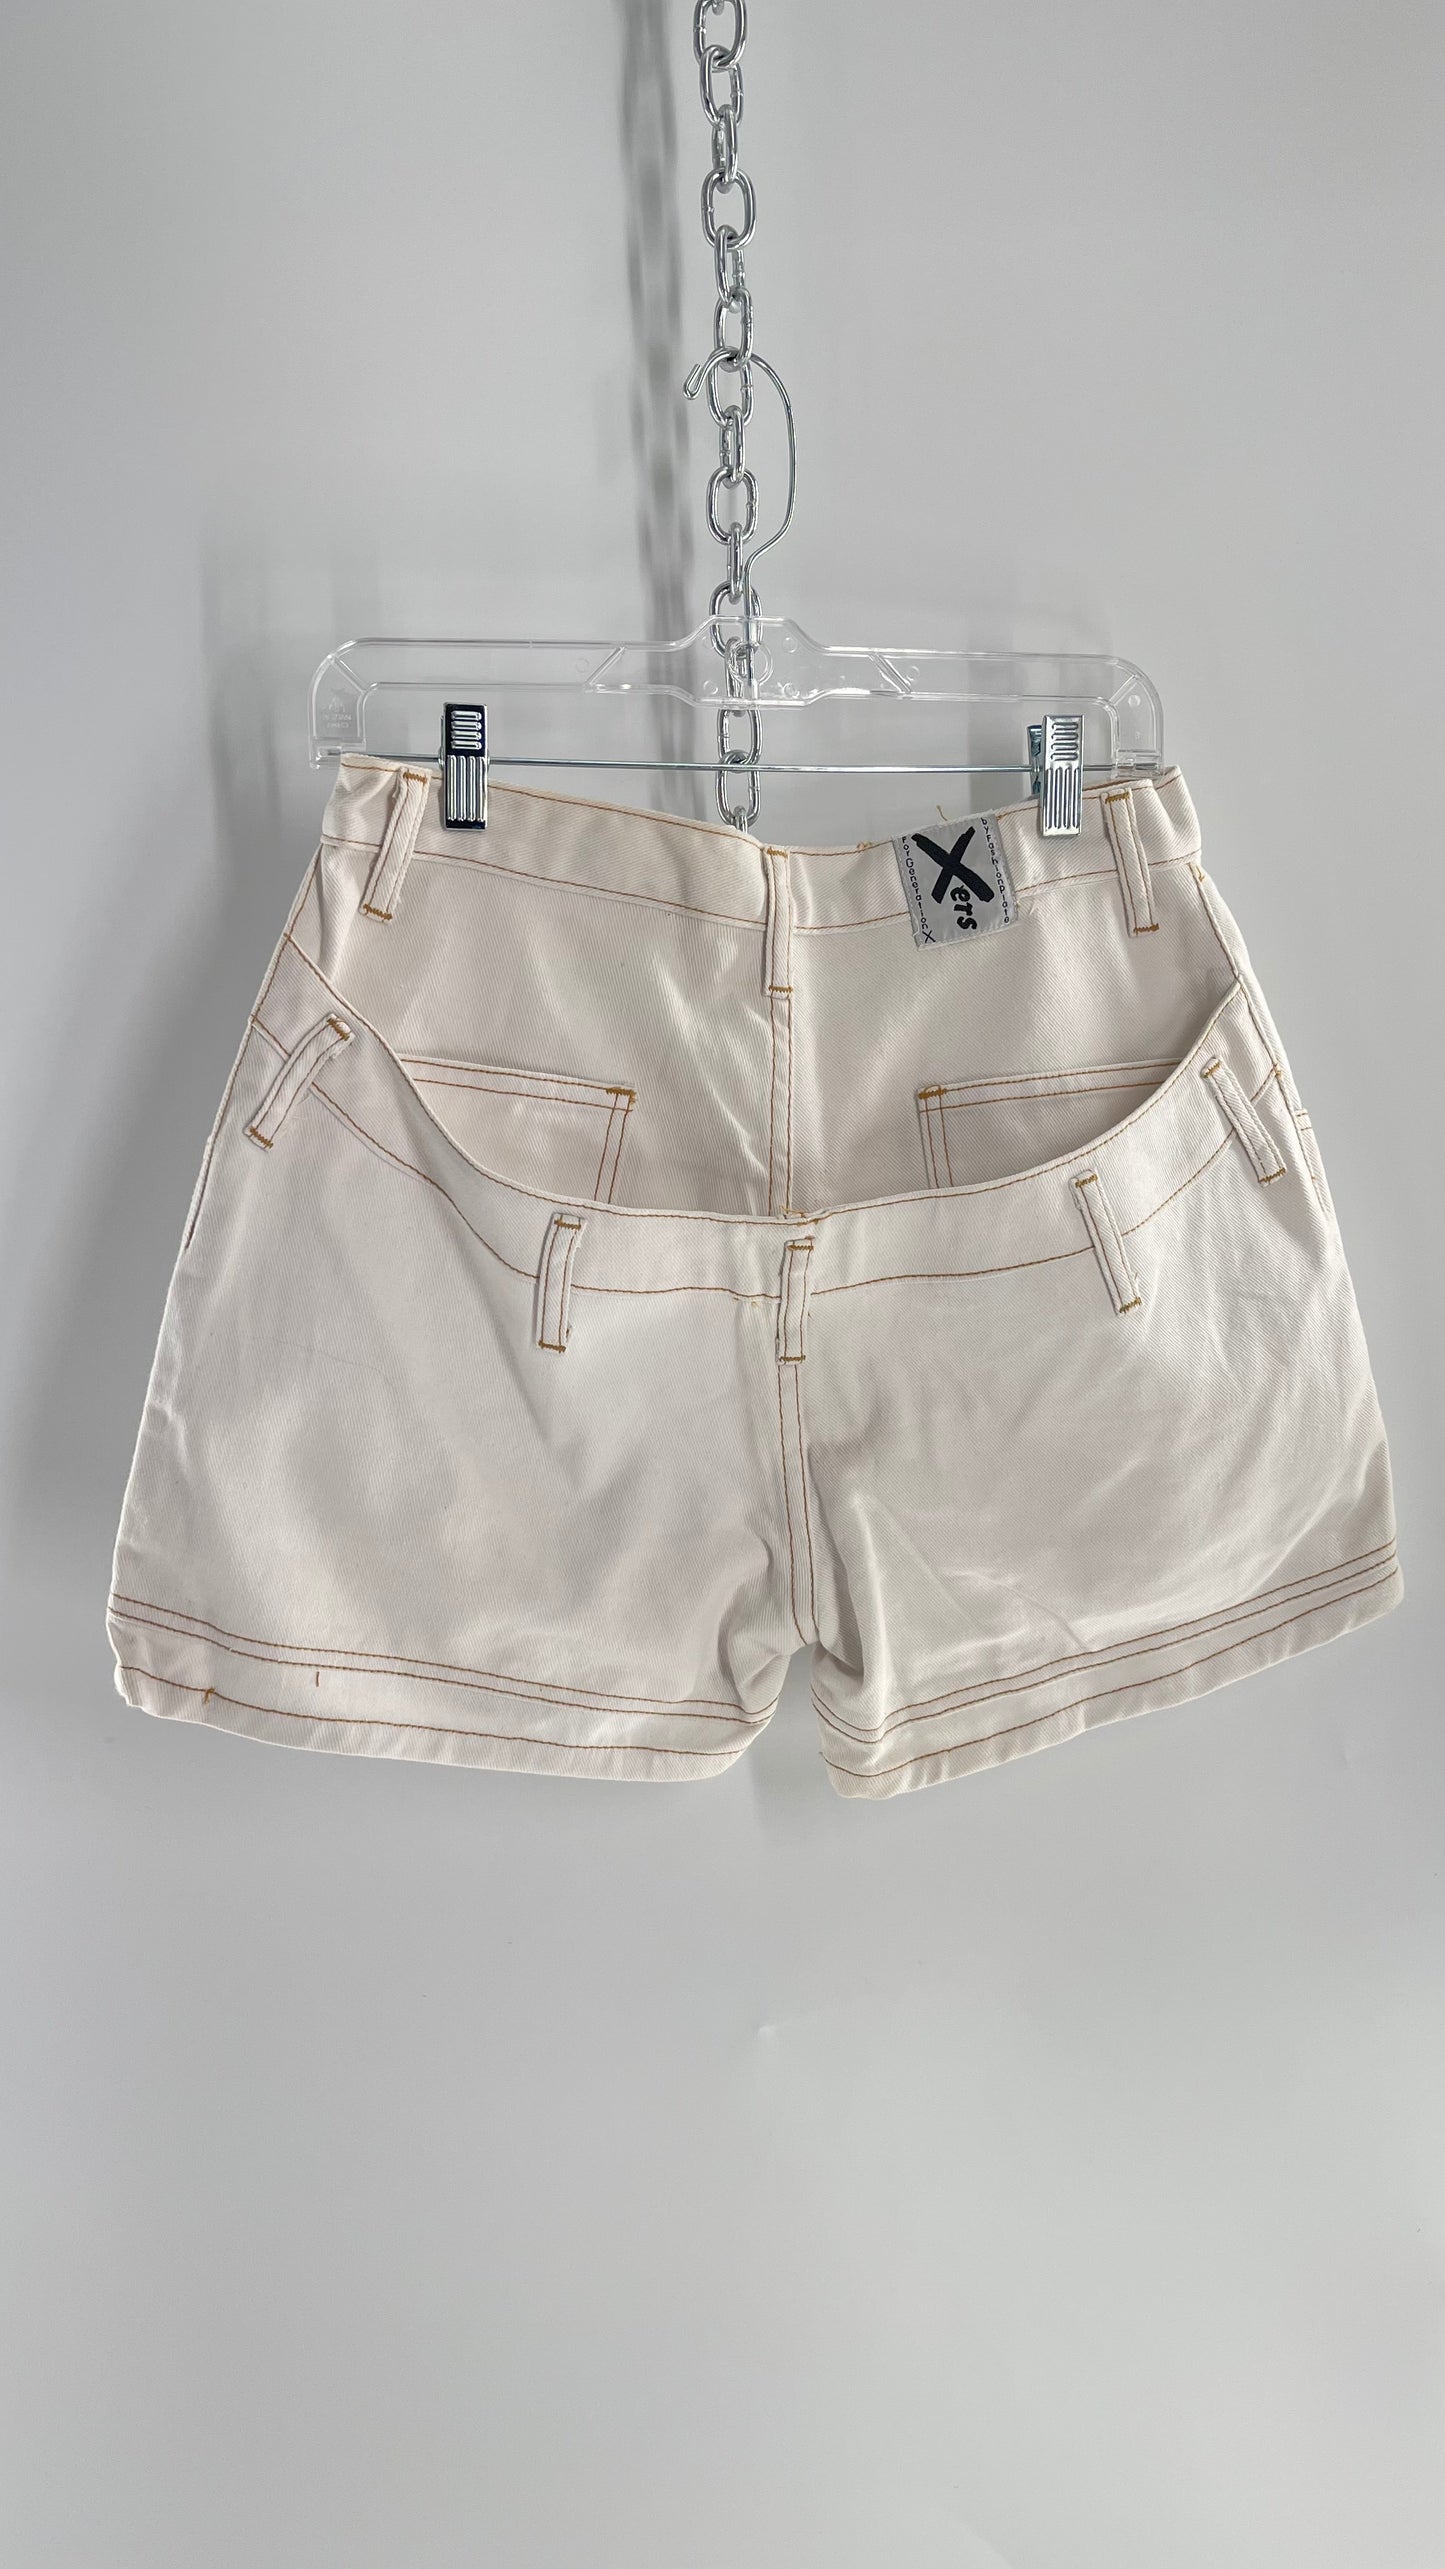 Vintage 1980s Generation X-ers White Contrast Stitch Shorts with Double Waistline on Bum (28)